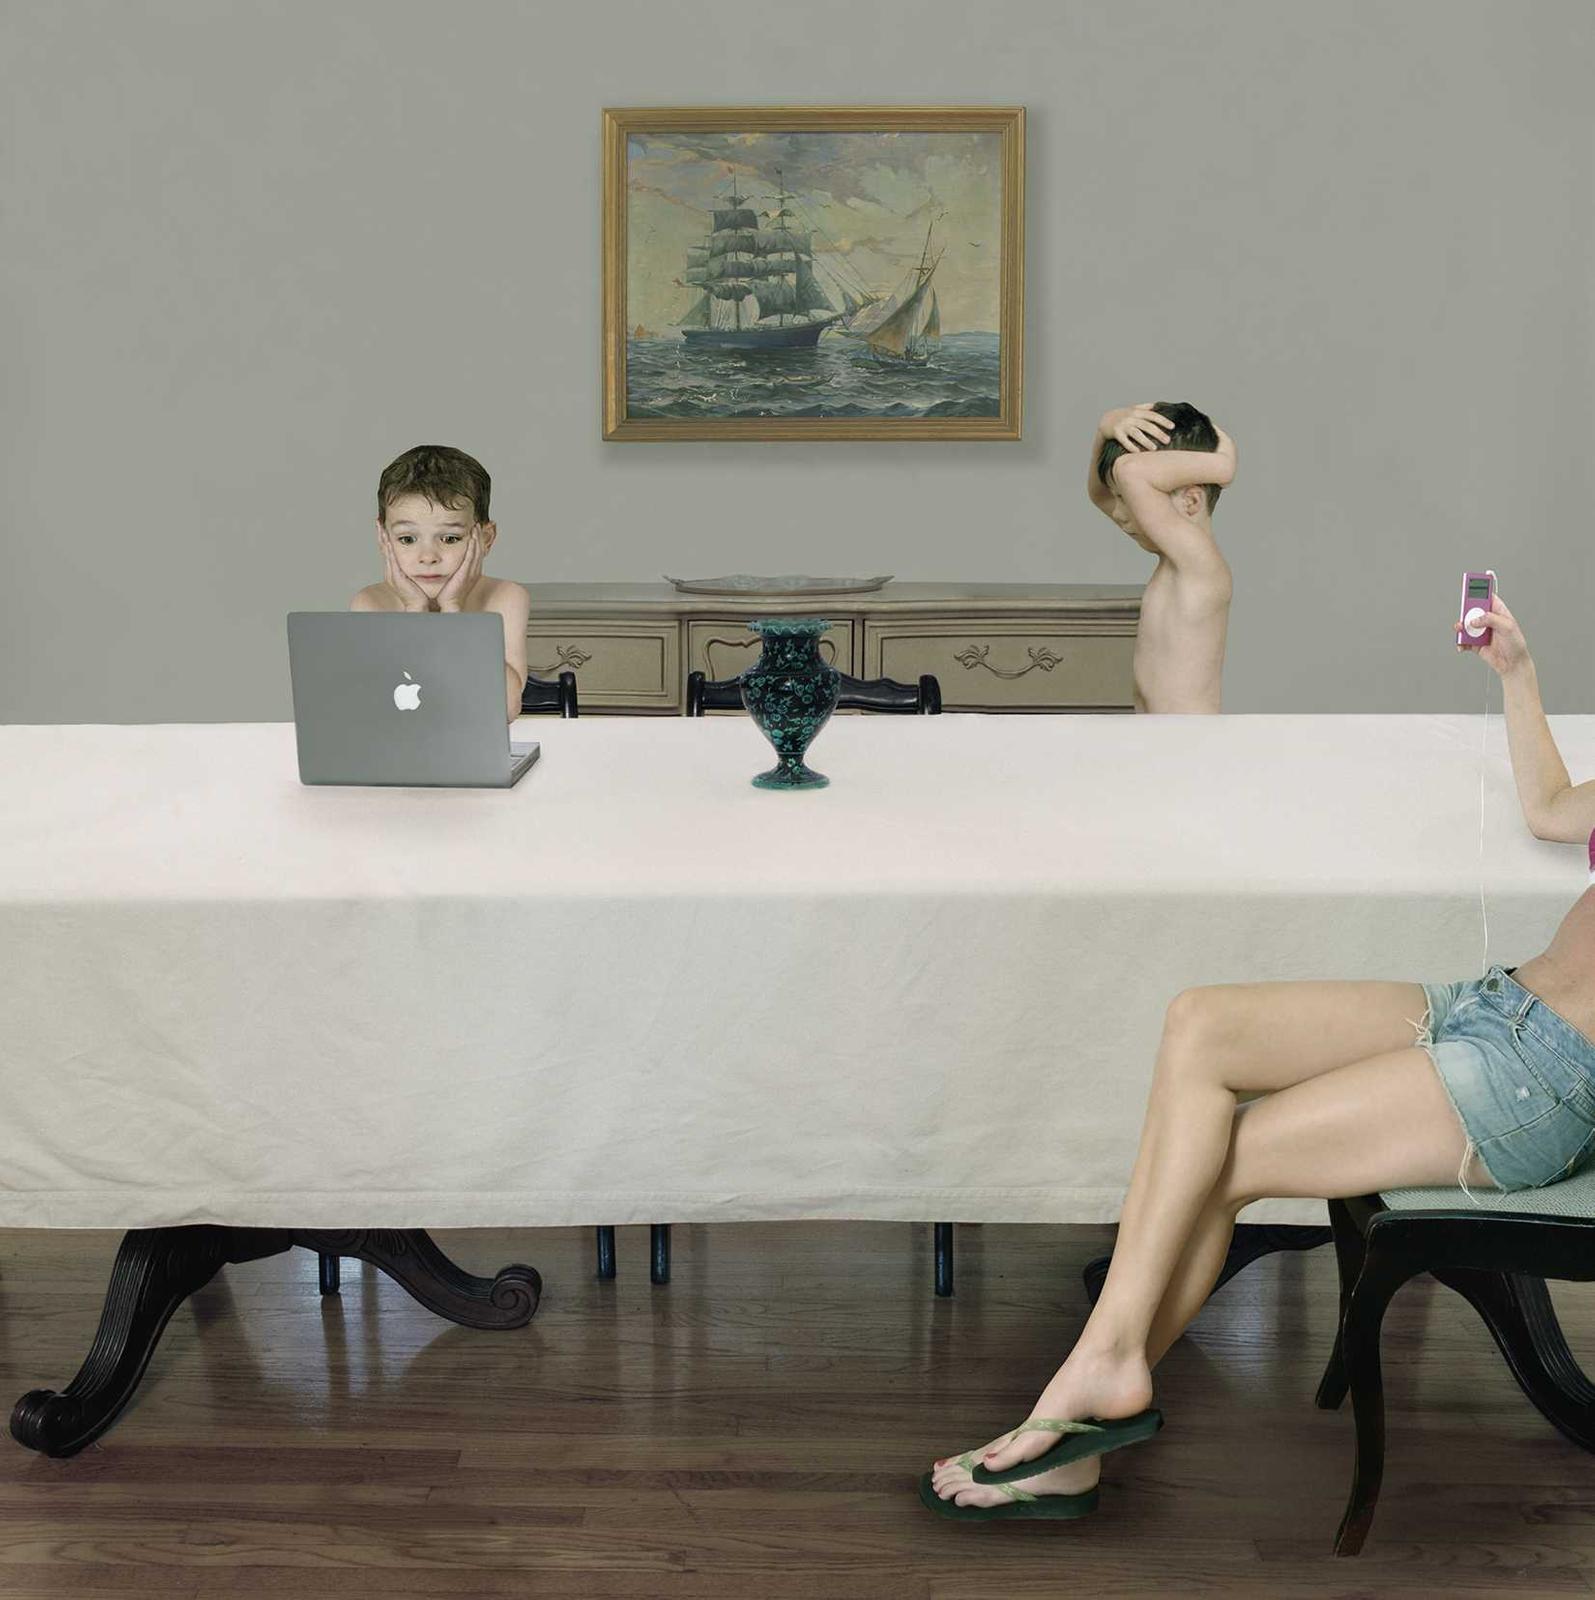 Babysitter, 2006 by Julie Blackmon is from her ongoing series Domestic Vacations. 

The Dutch proverb “a Jan Steen household” originated in the 17th century and is used today to refer to a home in disarray, full of rowdy children and boisterous